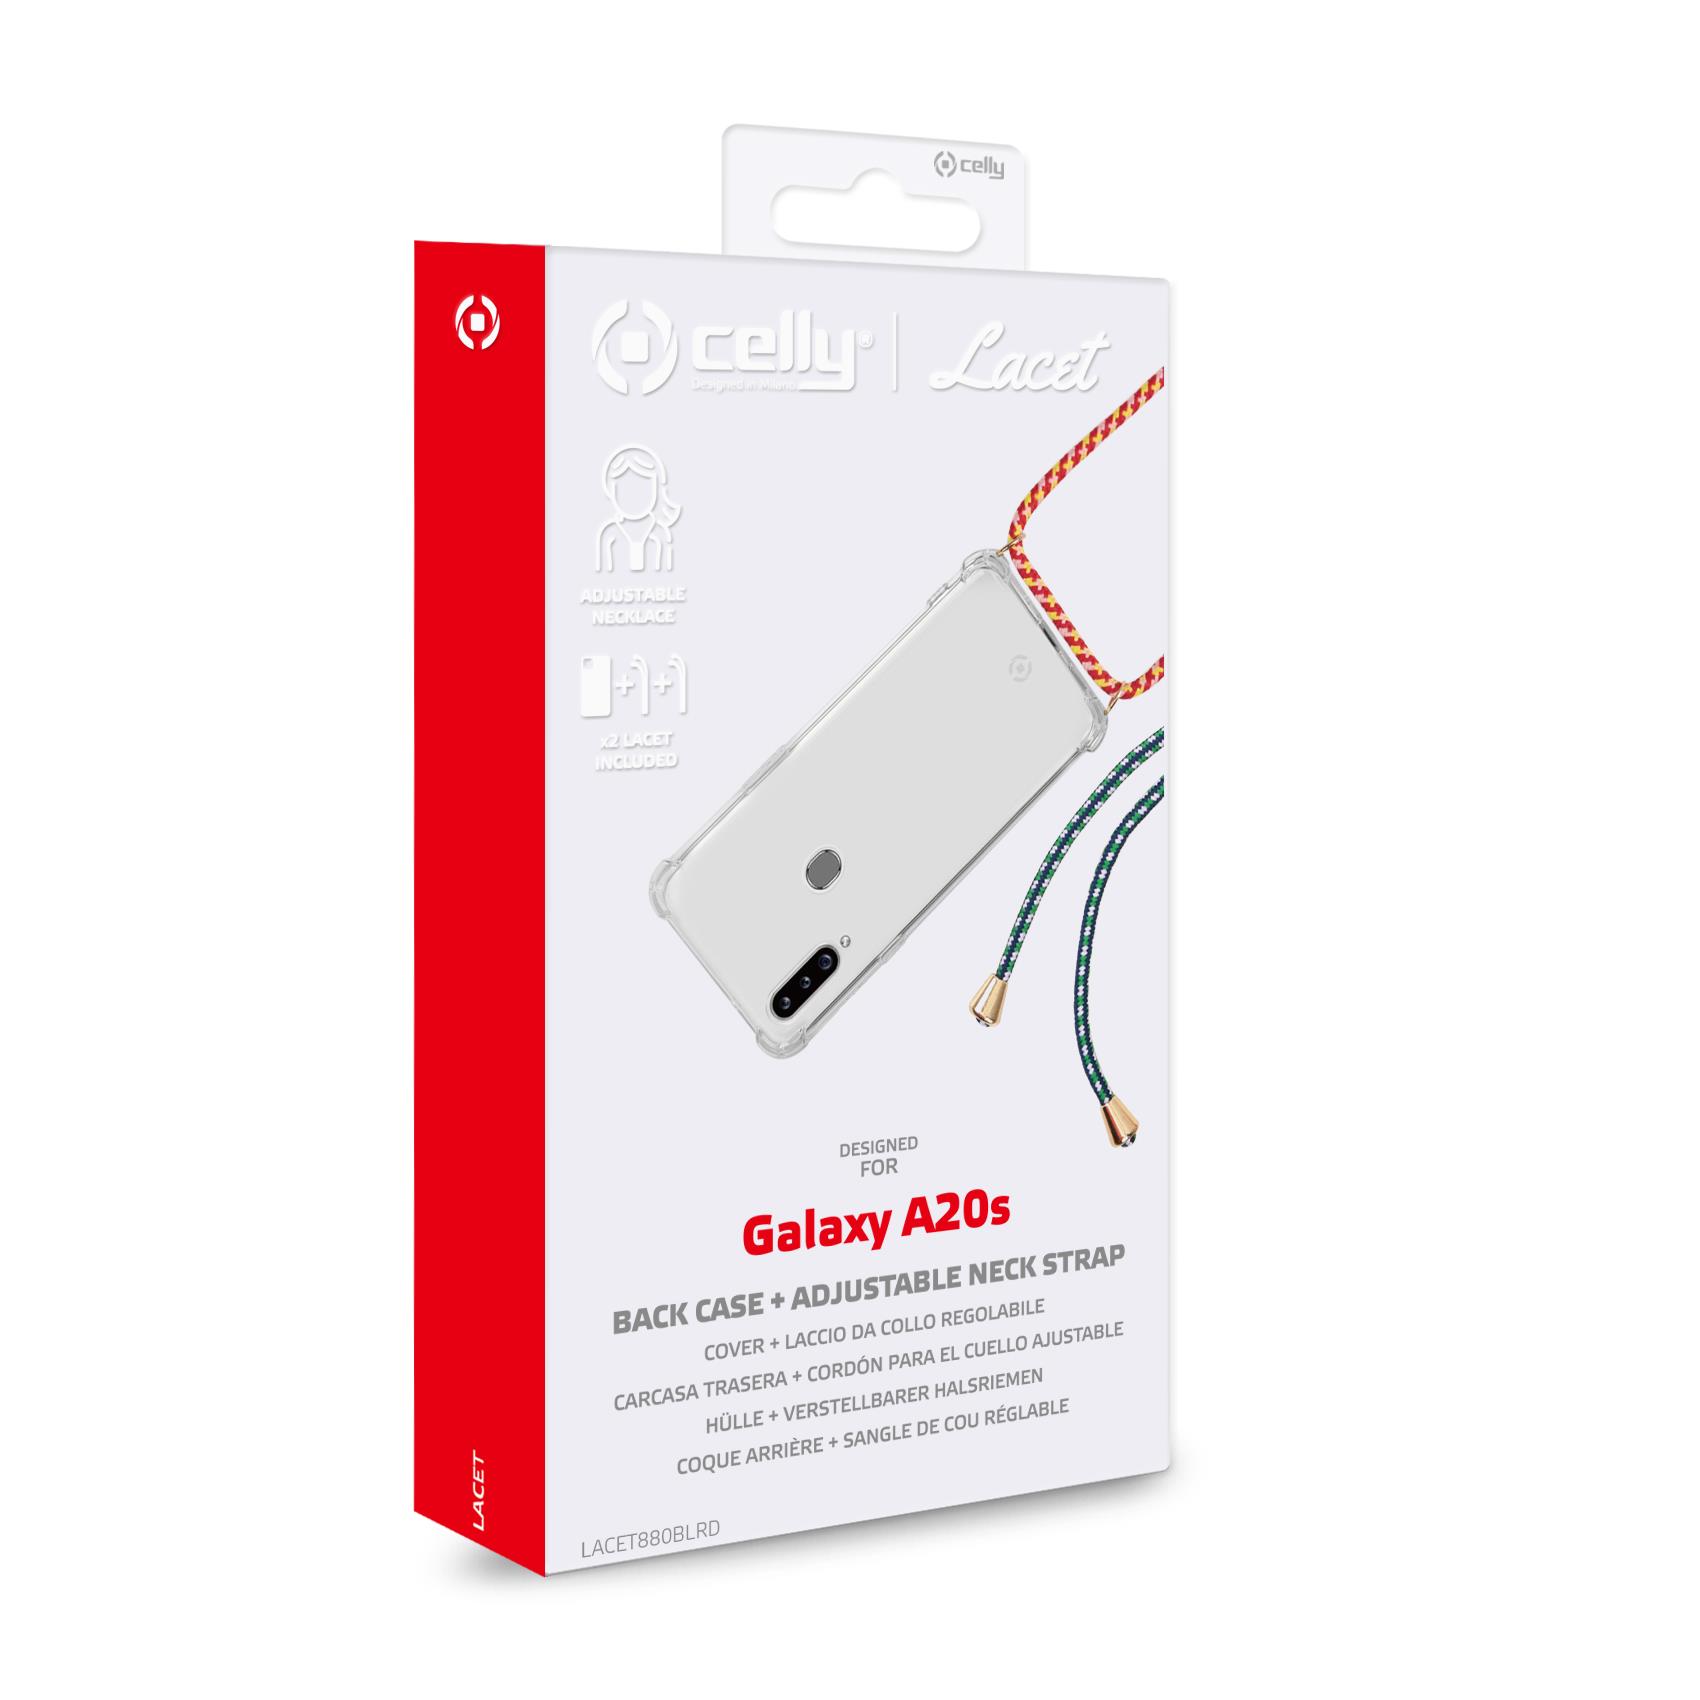 Lacet Case Galaxy A20s Bl Rd Celly Lacet880blrd 8021735761860